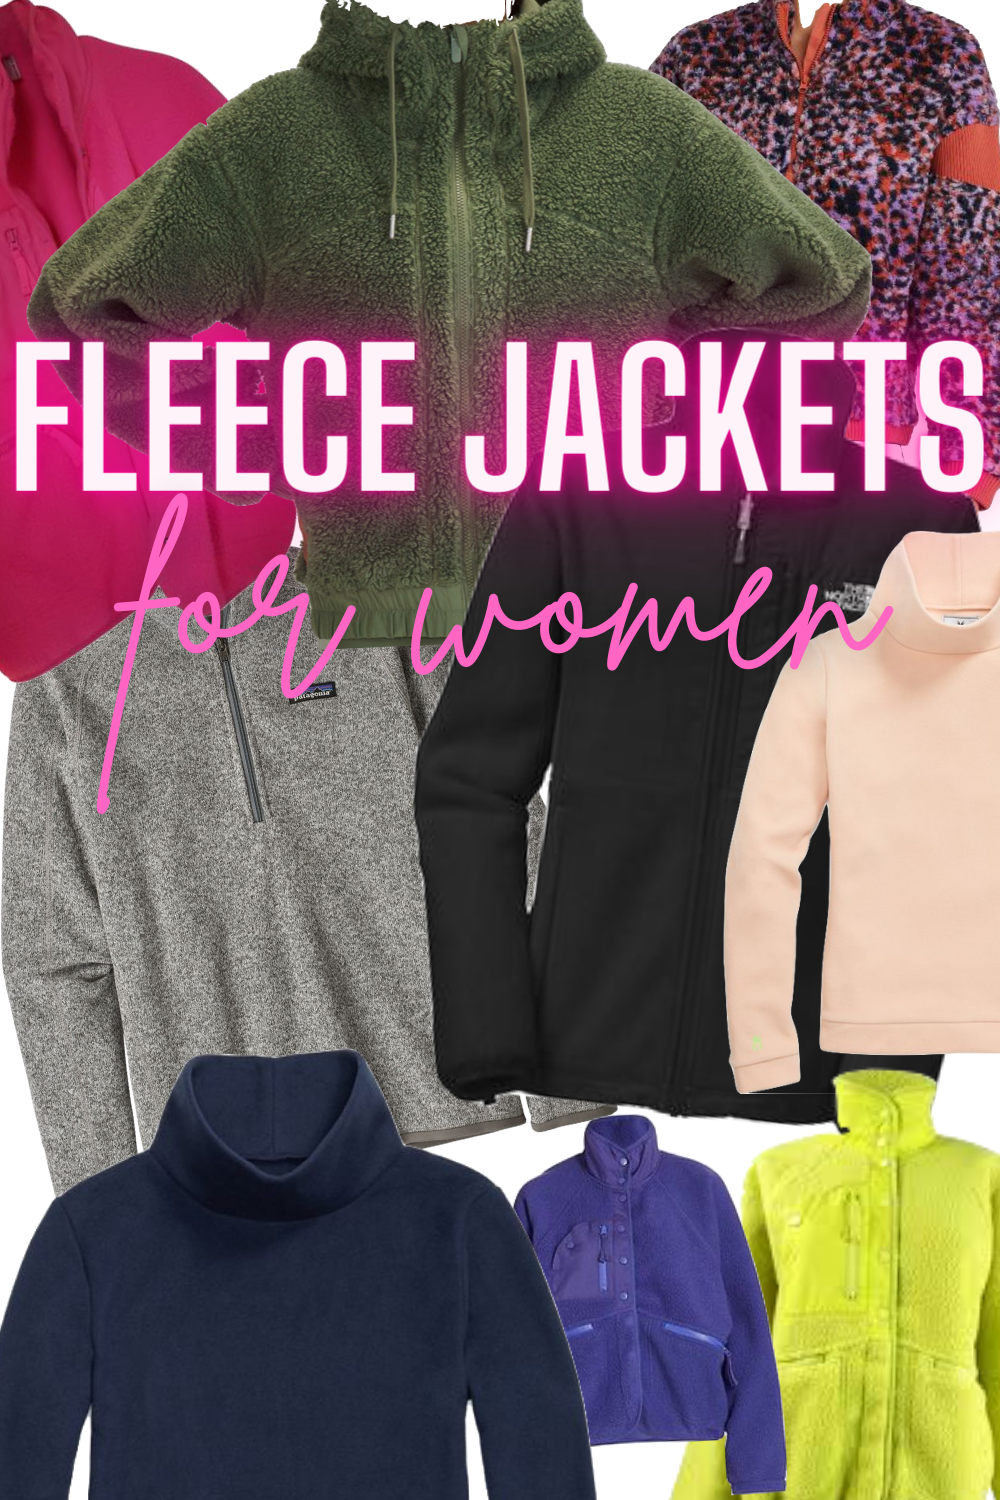 Fleece Jackets I Love - Looking for a fleece jacket? You're in luck, because I'm sharing my favorite women's fleece jackets that are perfect for chilly weather! | Womens Fleece Jackets | 2021 Fleece Jackets